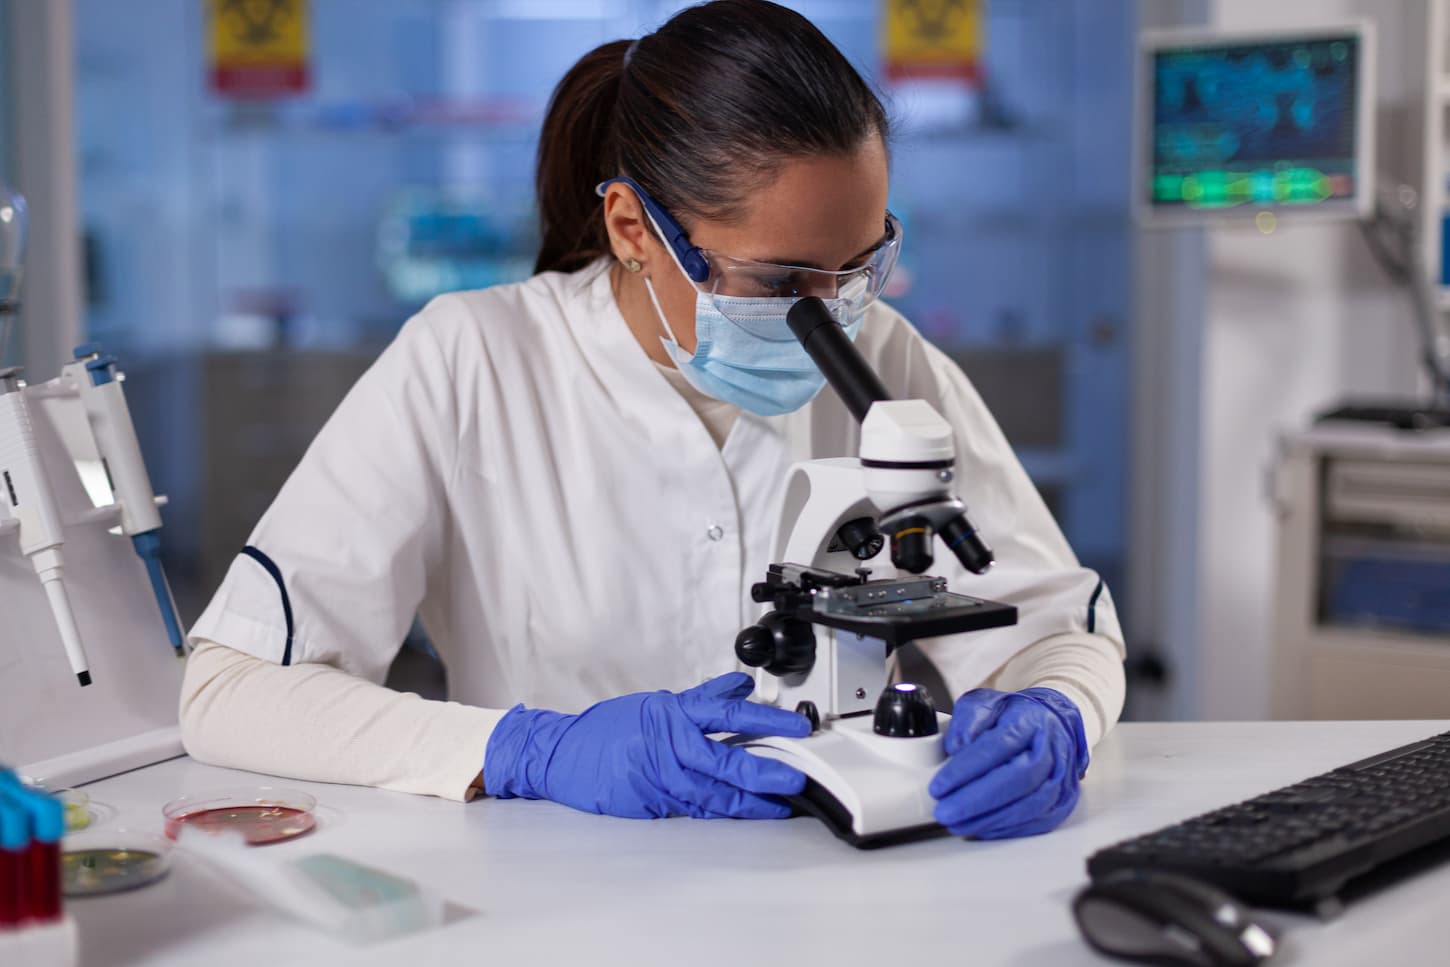 An image of a Specialist researcher analyzing genetic sample using medical microscope.